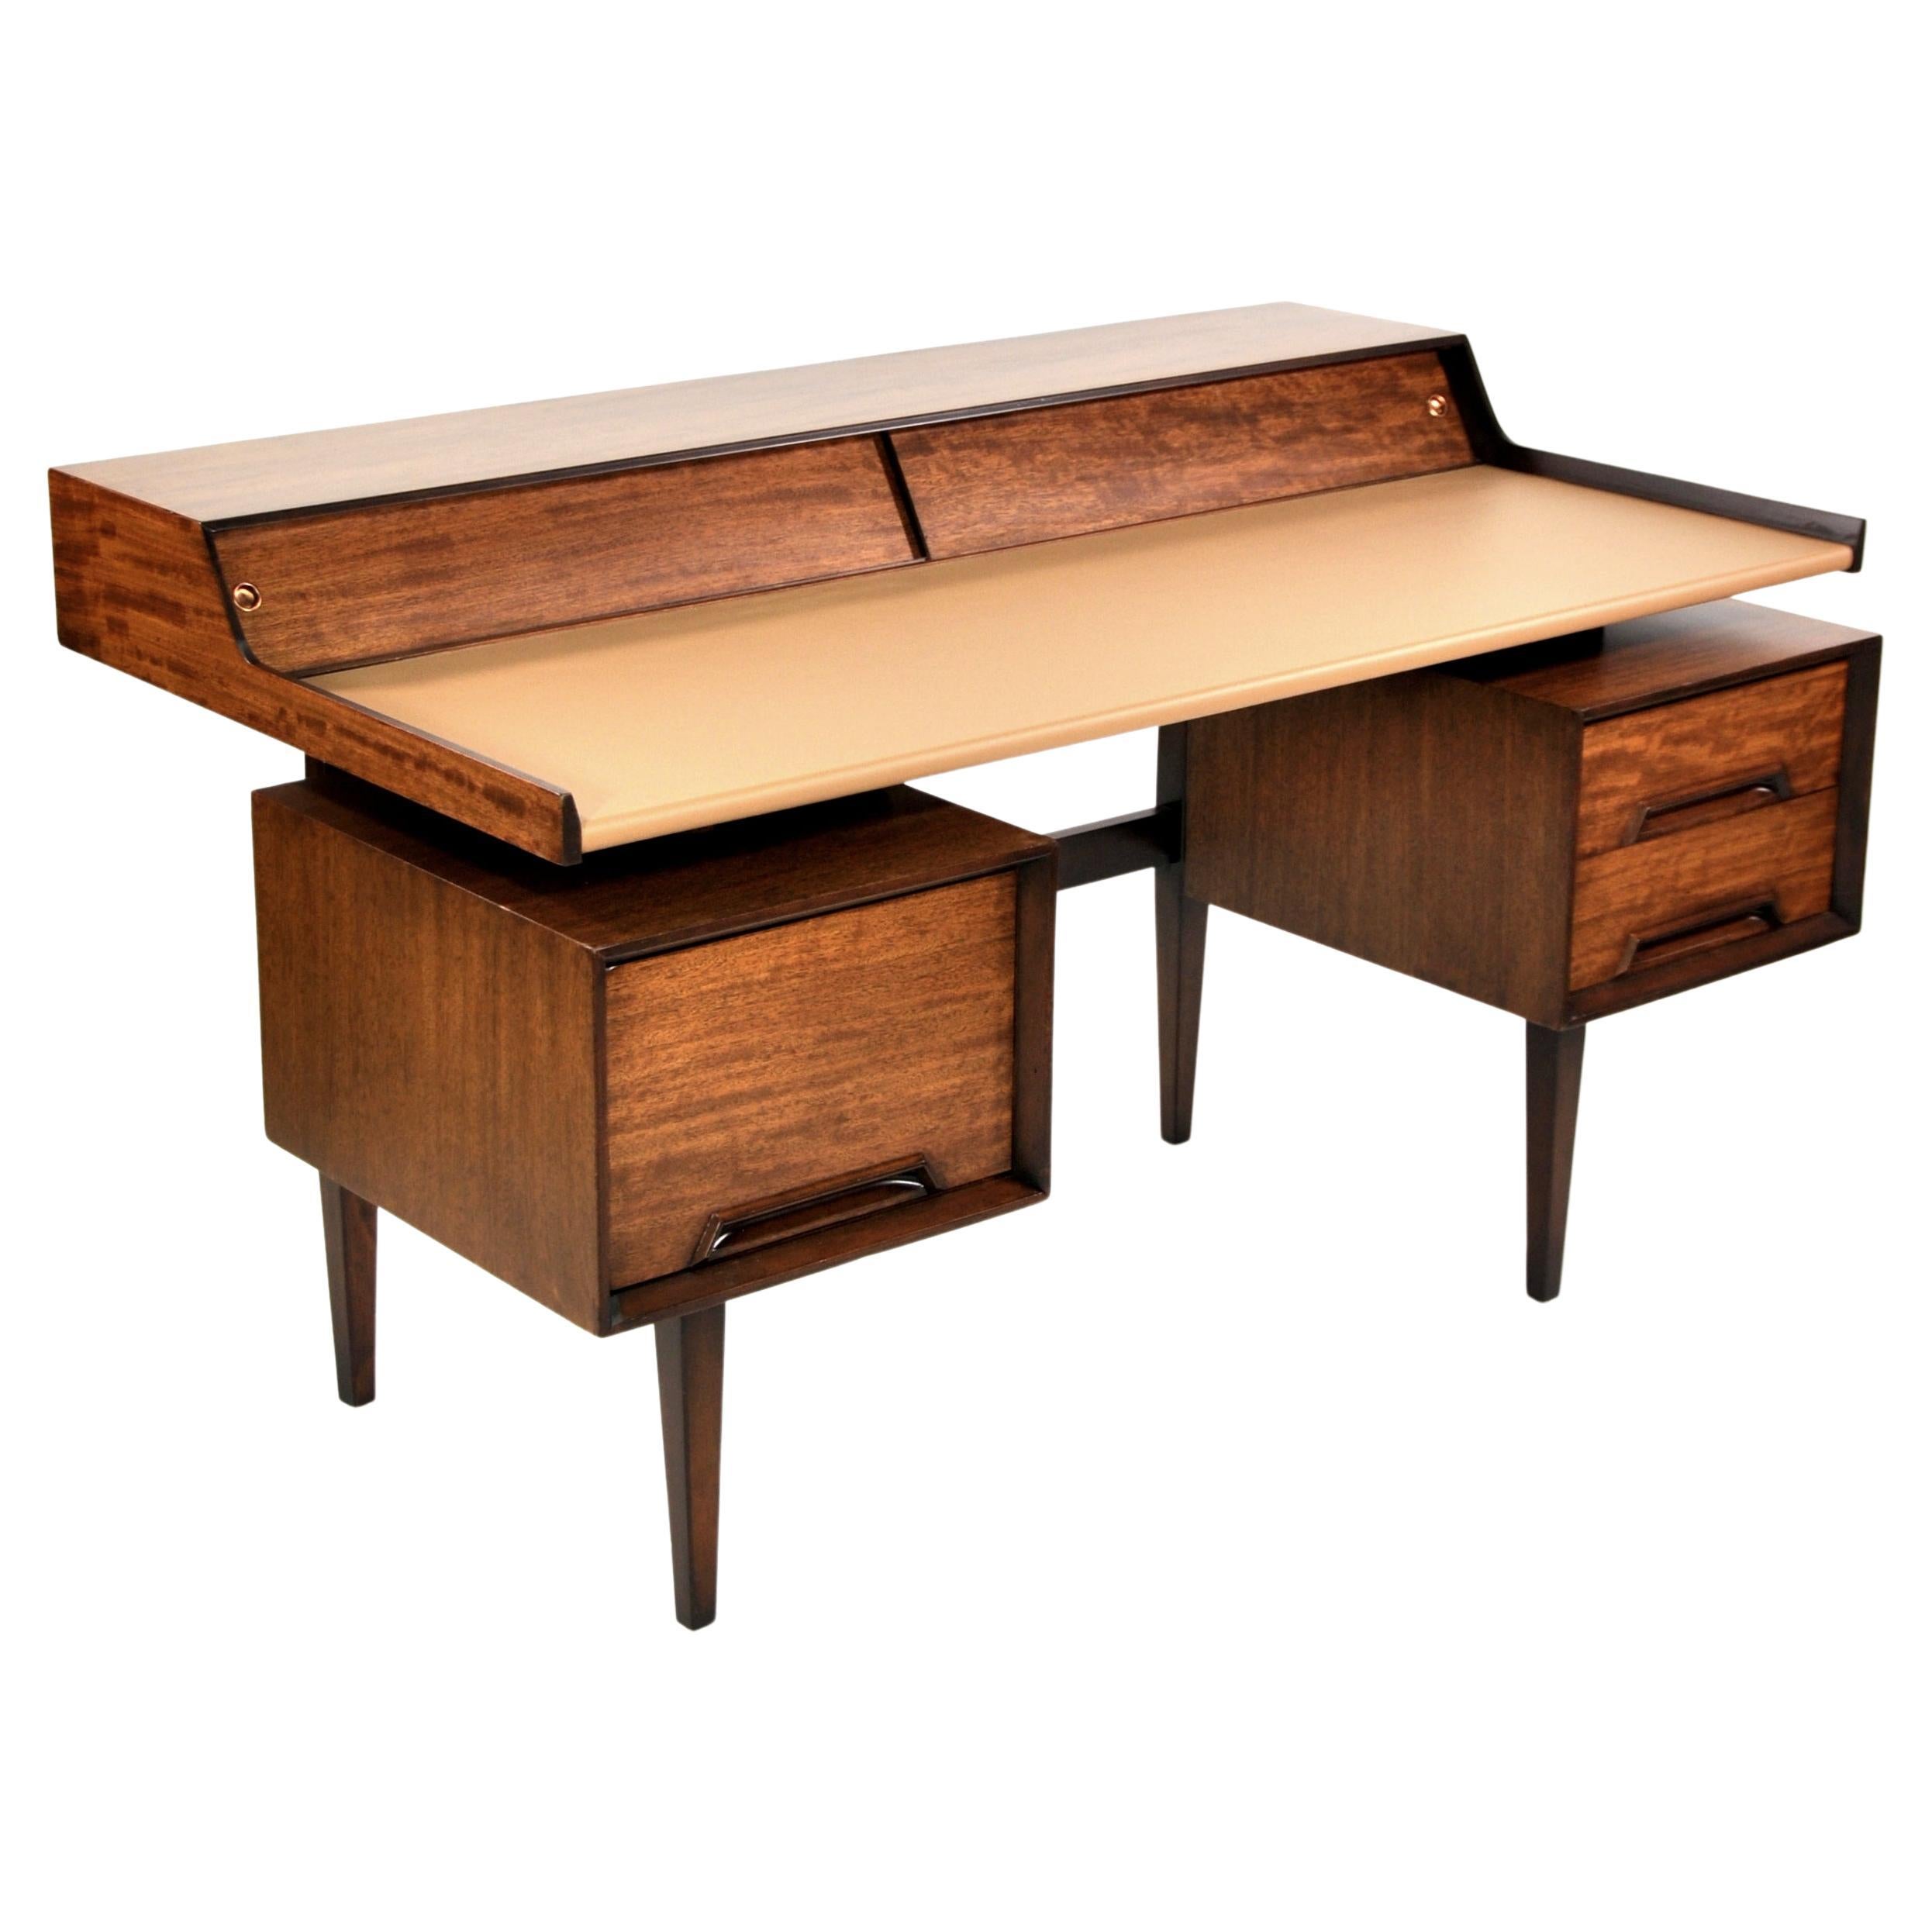 Milo Baughman for Drexel Perspective Mindoro and Leather Desk 5